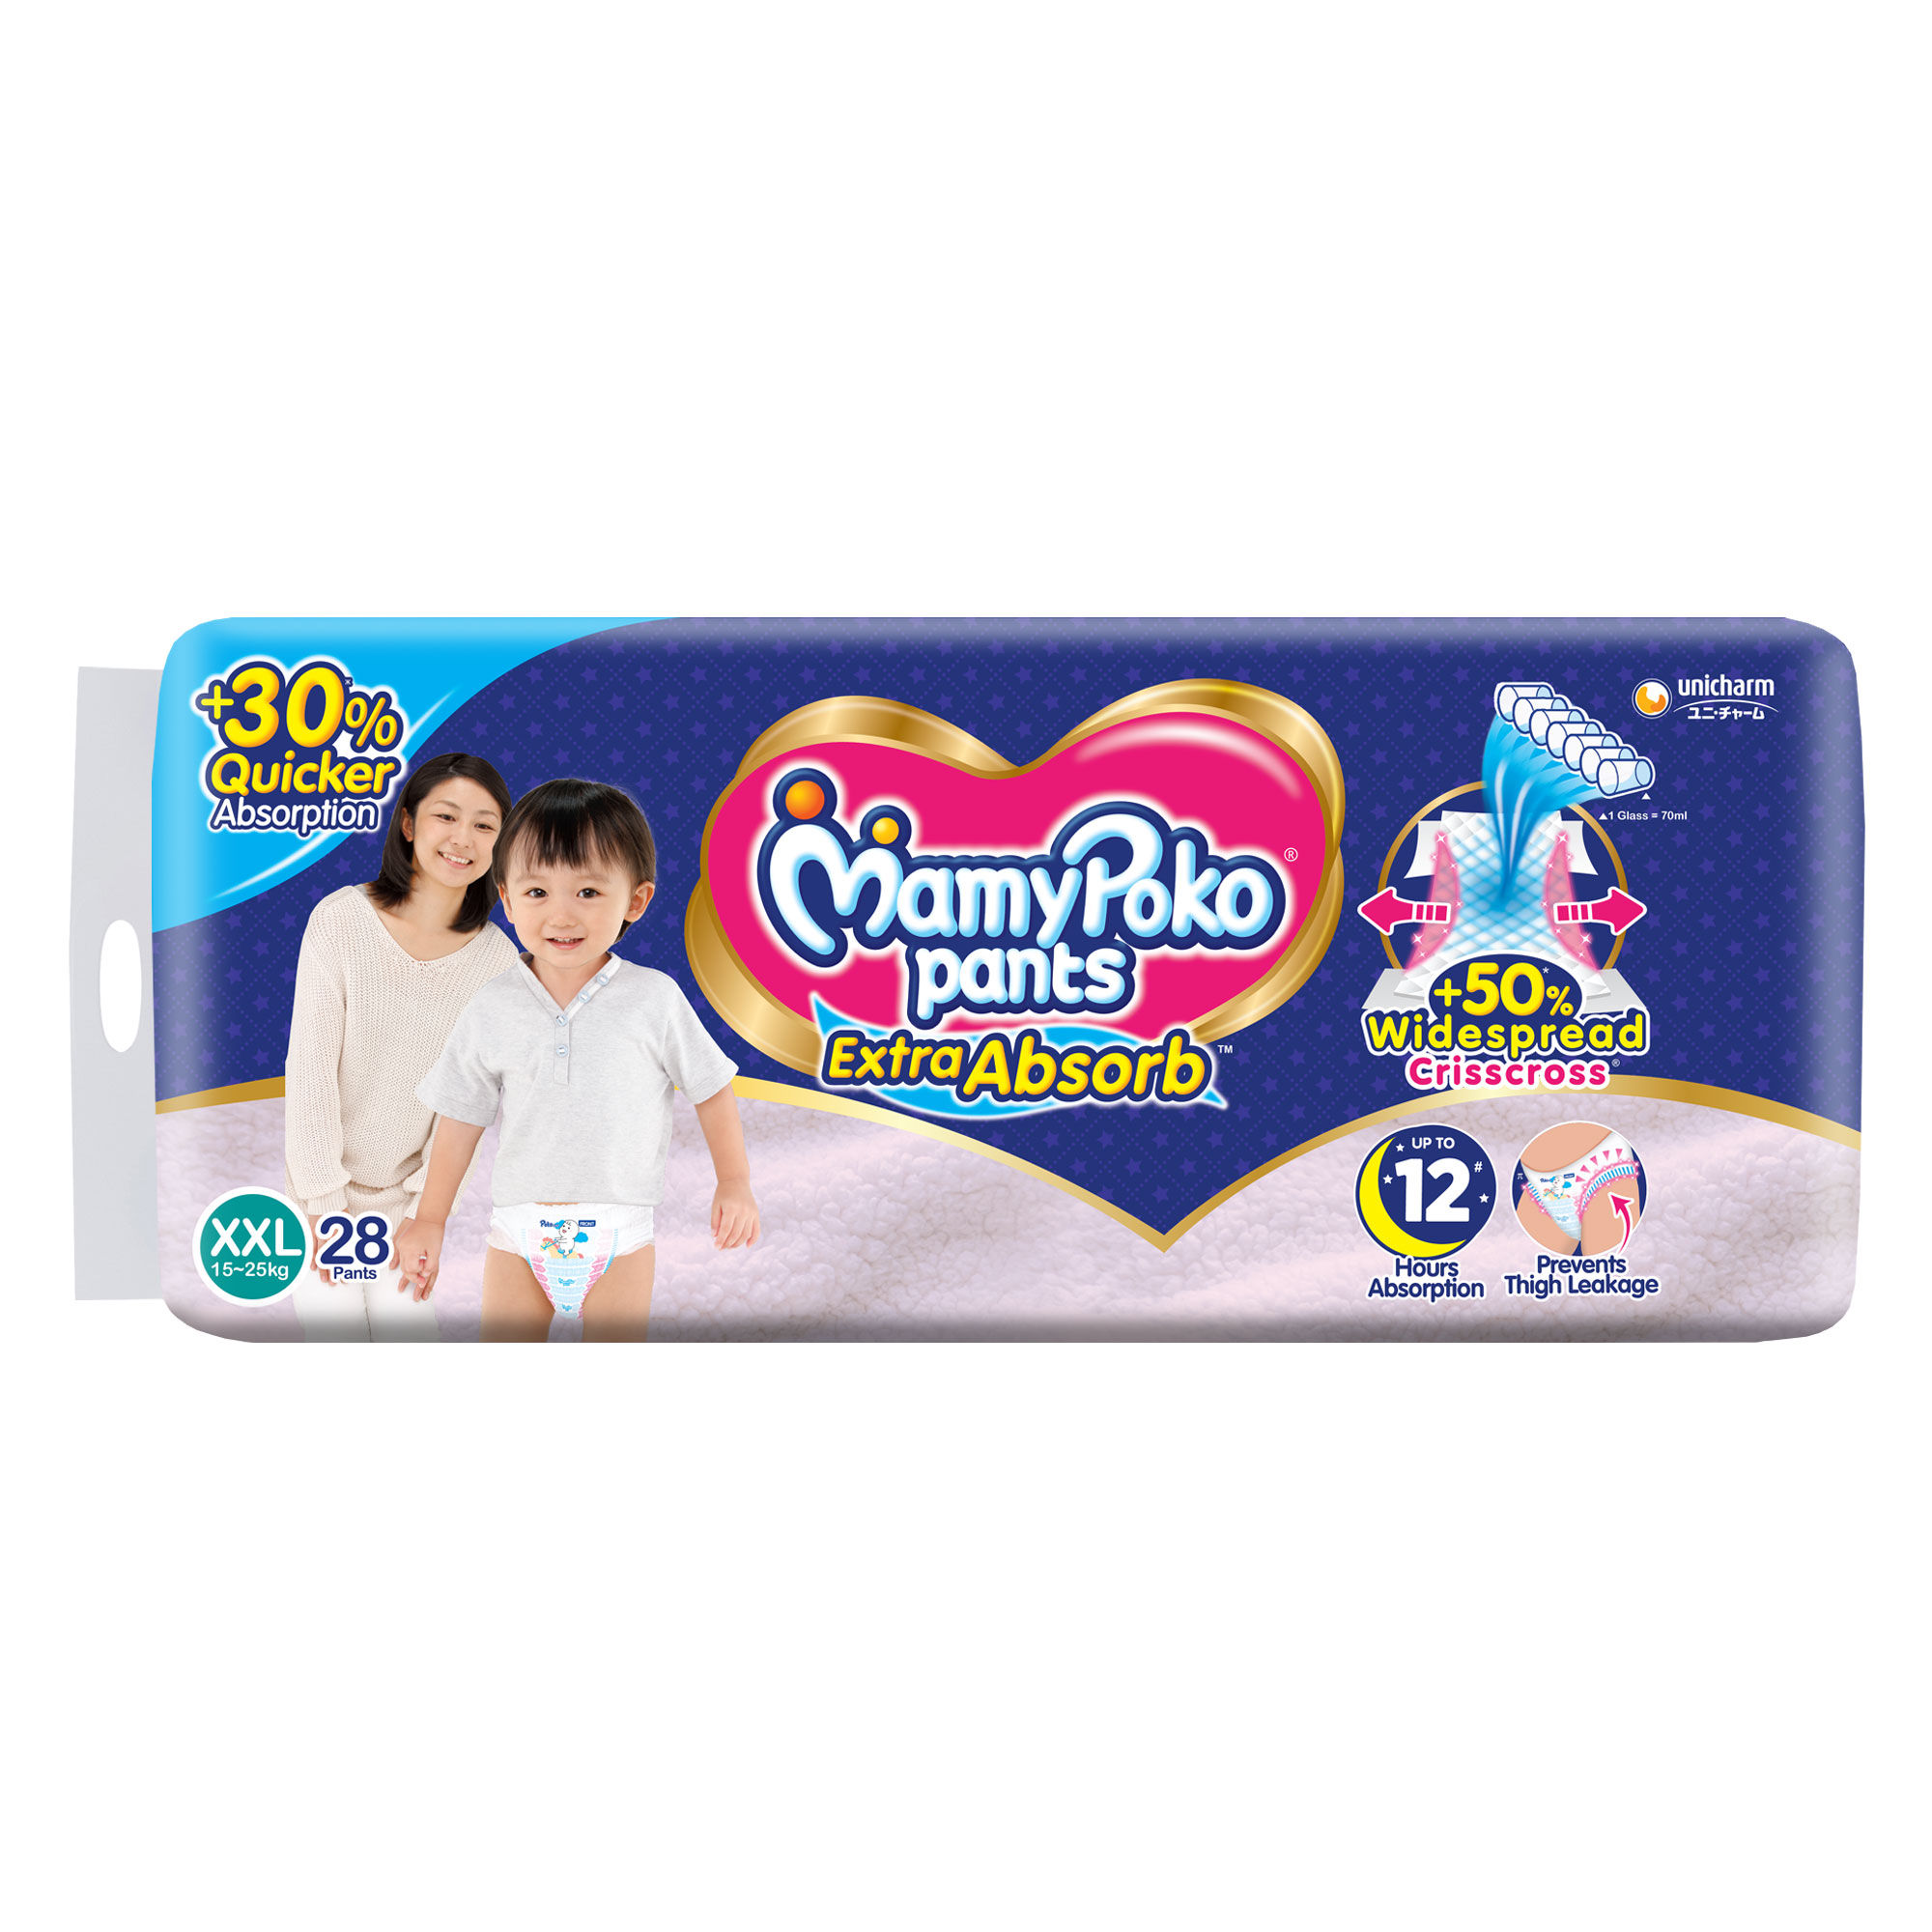 Mamypoko Pants Extra Absorb Diapers Nb 0 New Born Reviews: Latest Review of Mamypoko  Pants Extra Absorb Diapers Nb 0 New Born | Price in India | Flipkart.com